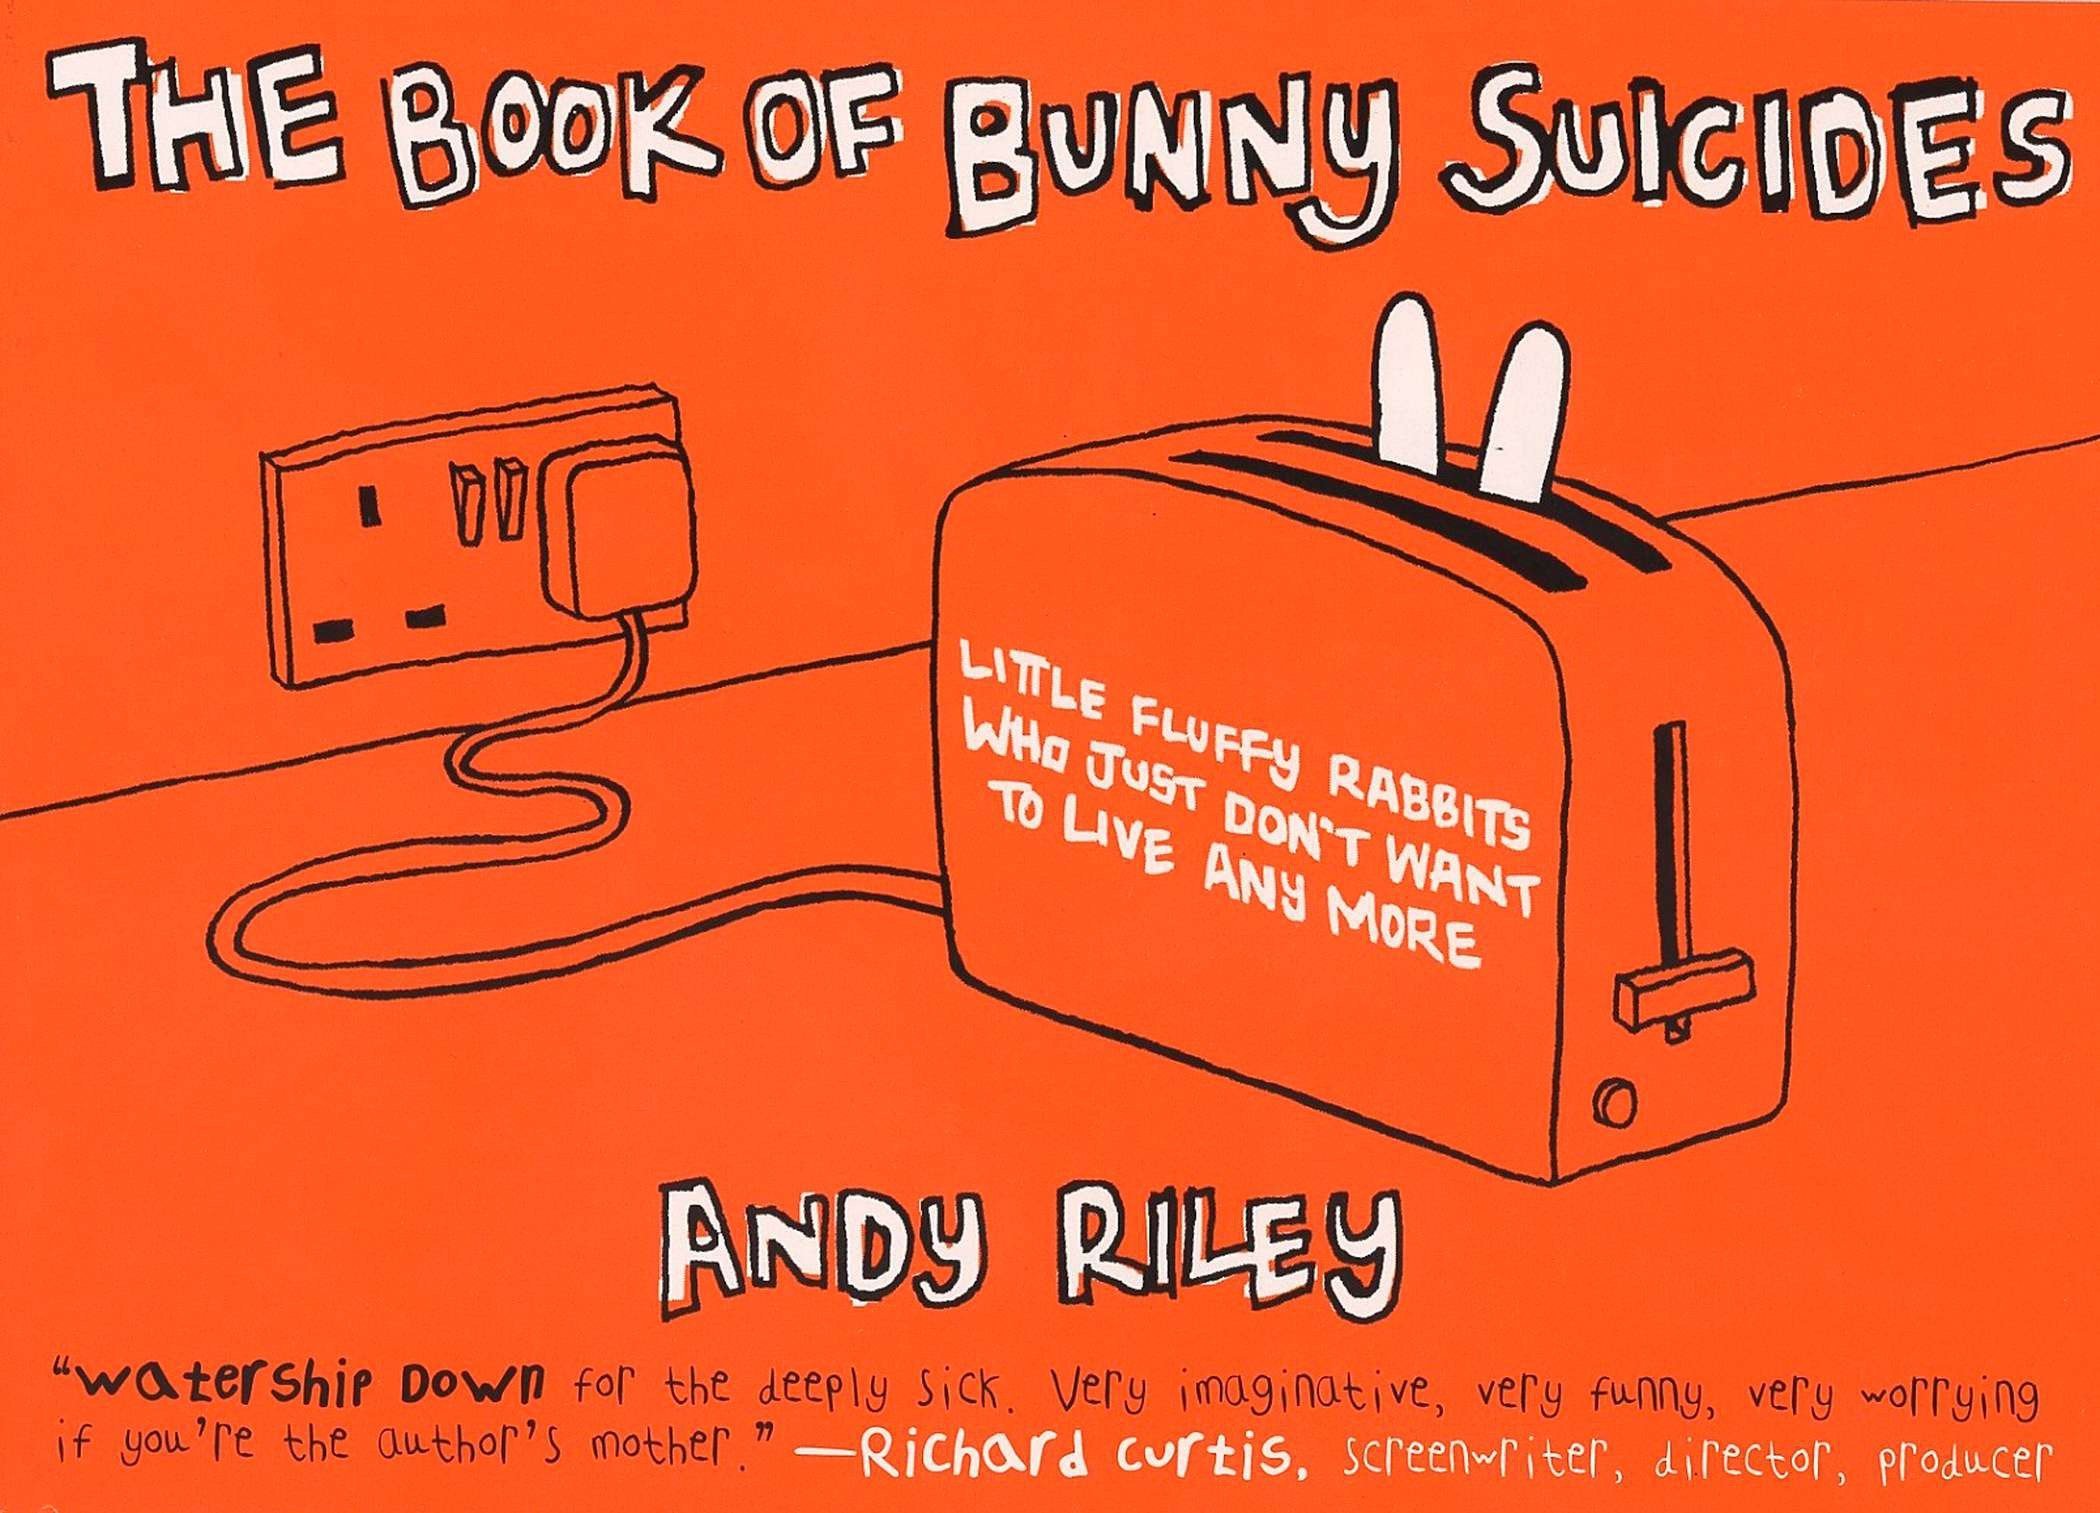 The Book of Bunny Suicides: Little Fluffy Rabbits Who Just Don't Want to Live Anymore (Books of the Bunny Suicides Series)